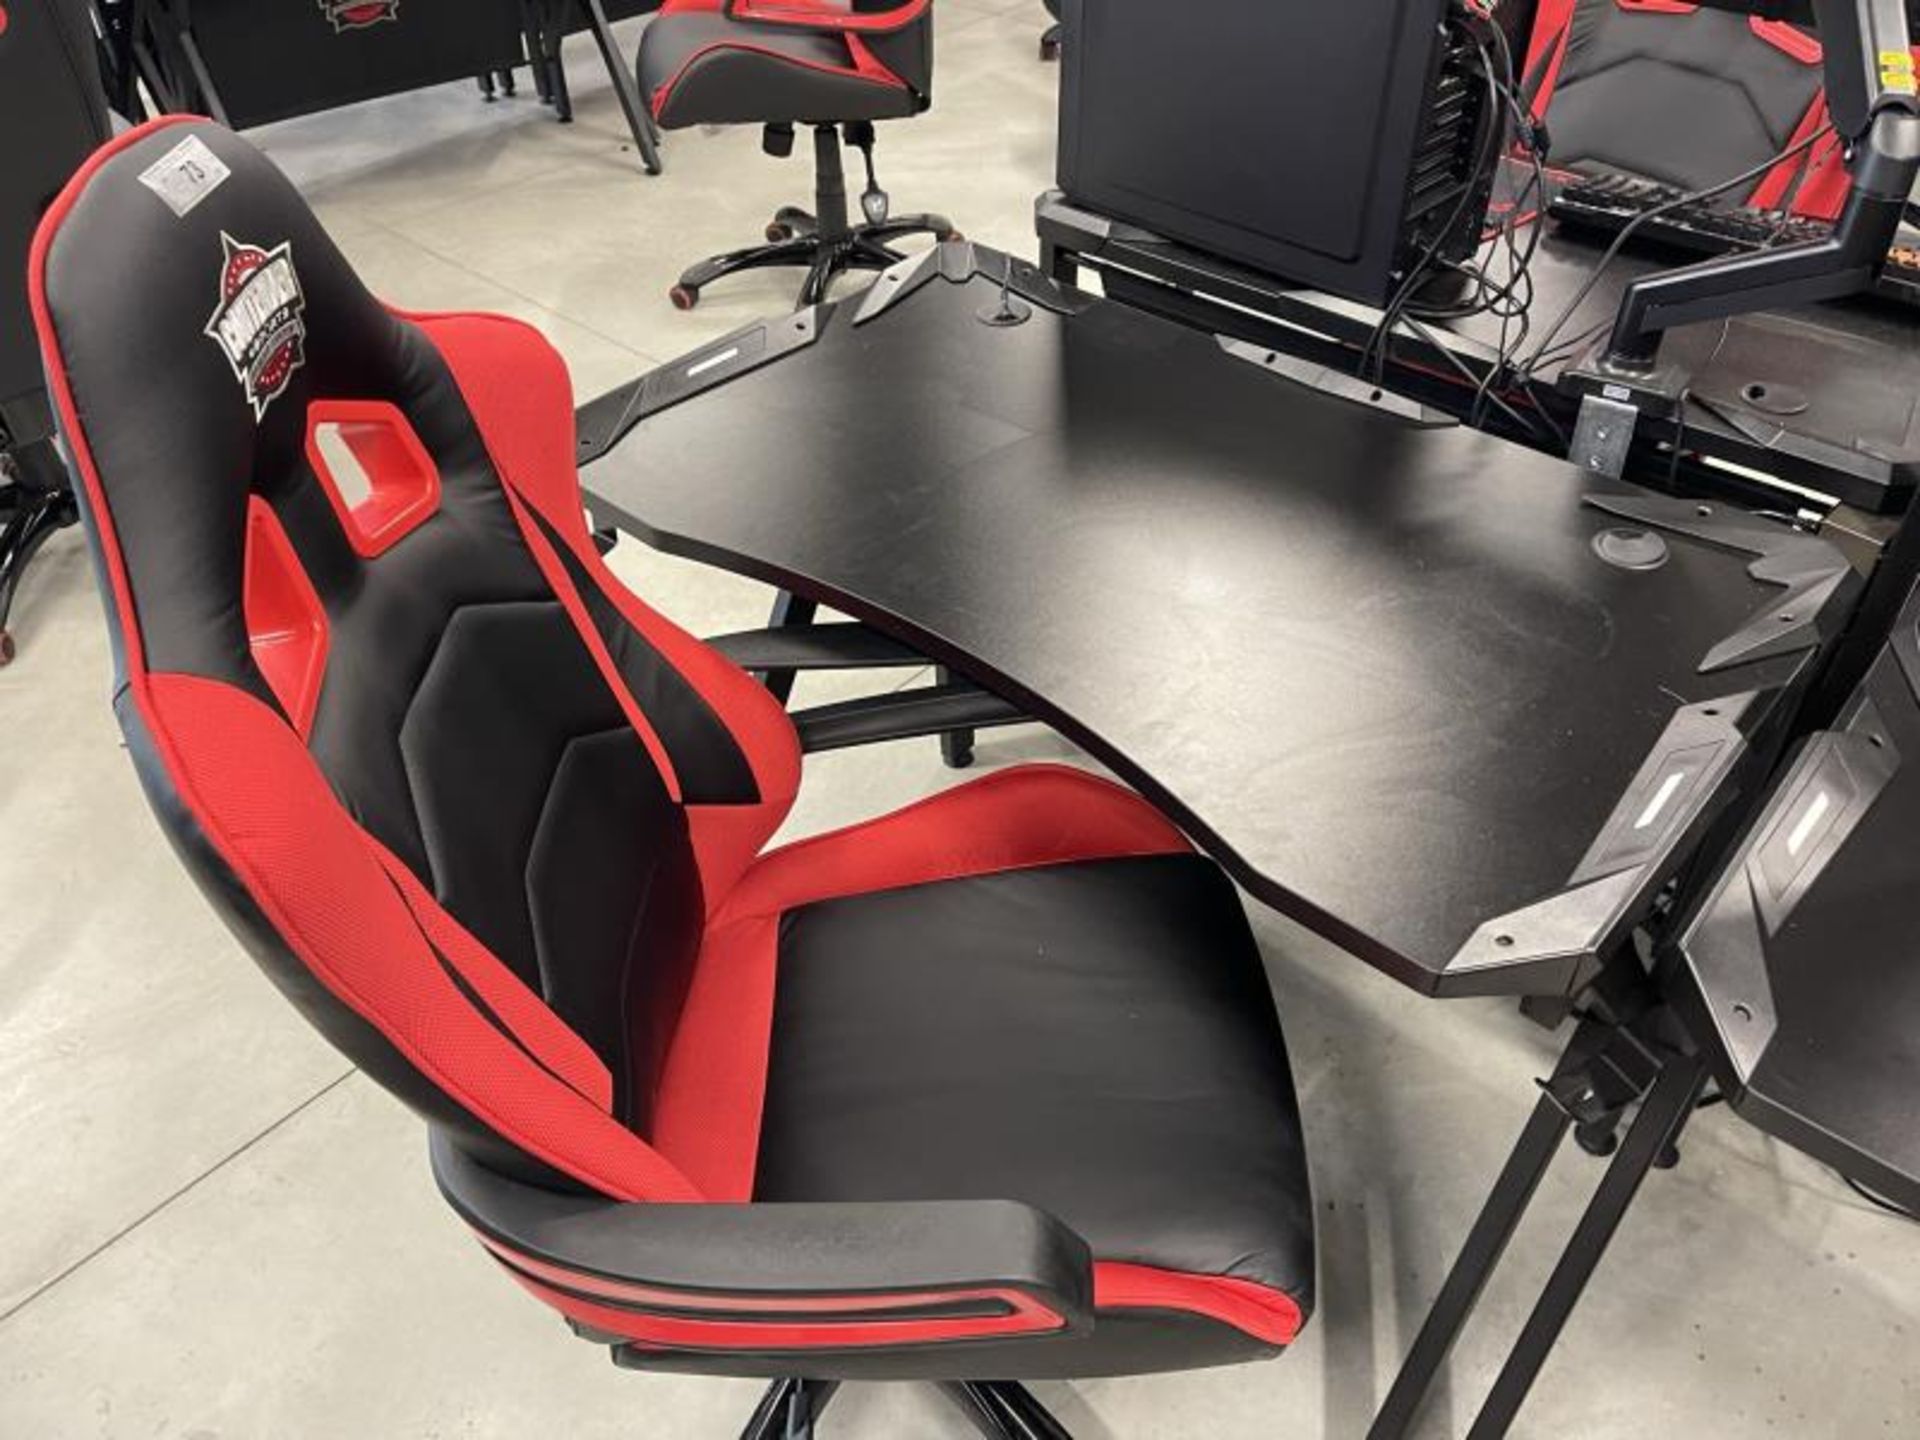 Gaming Desk 40" x 24" w/ Contender Red & Black Gaming Chair